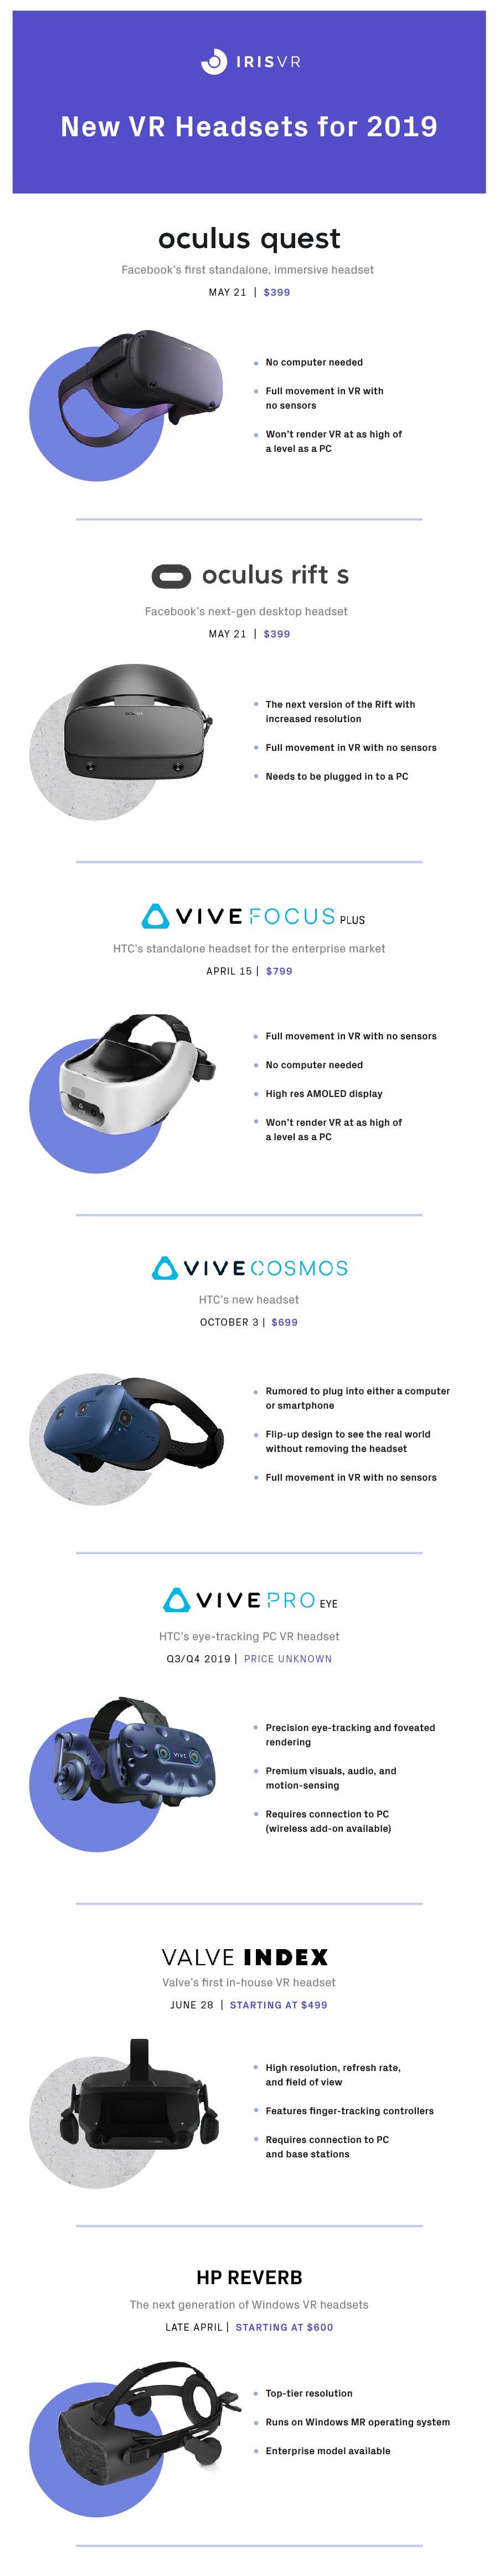 VR Headsets Infographic